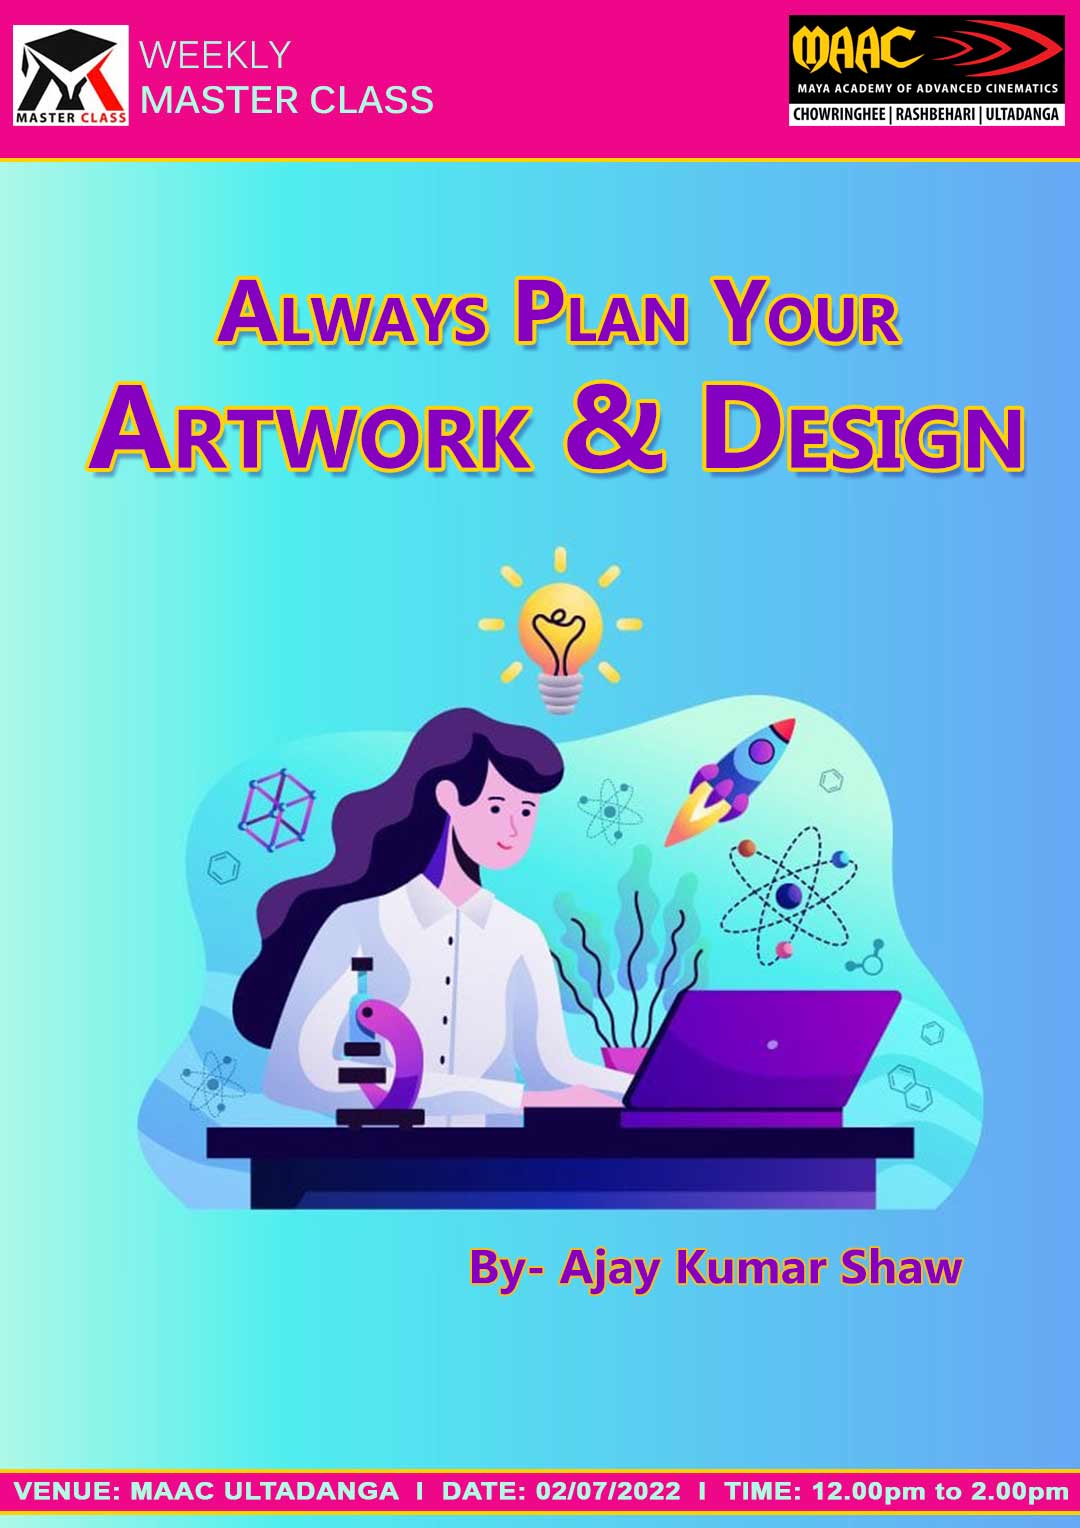 Weekly Master Class on Always Plan Your Artwork & Design